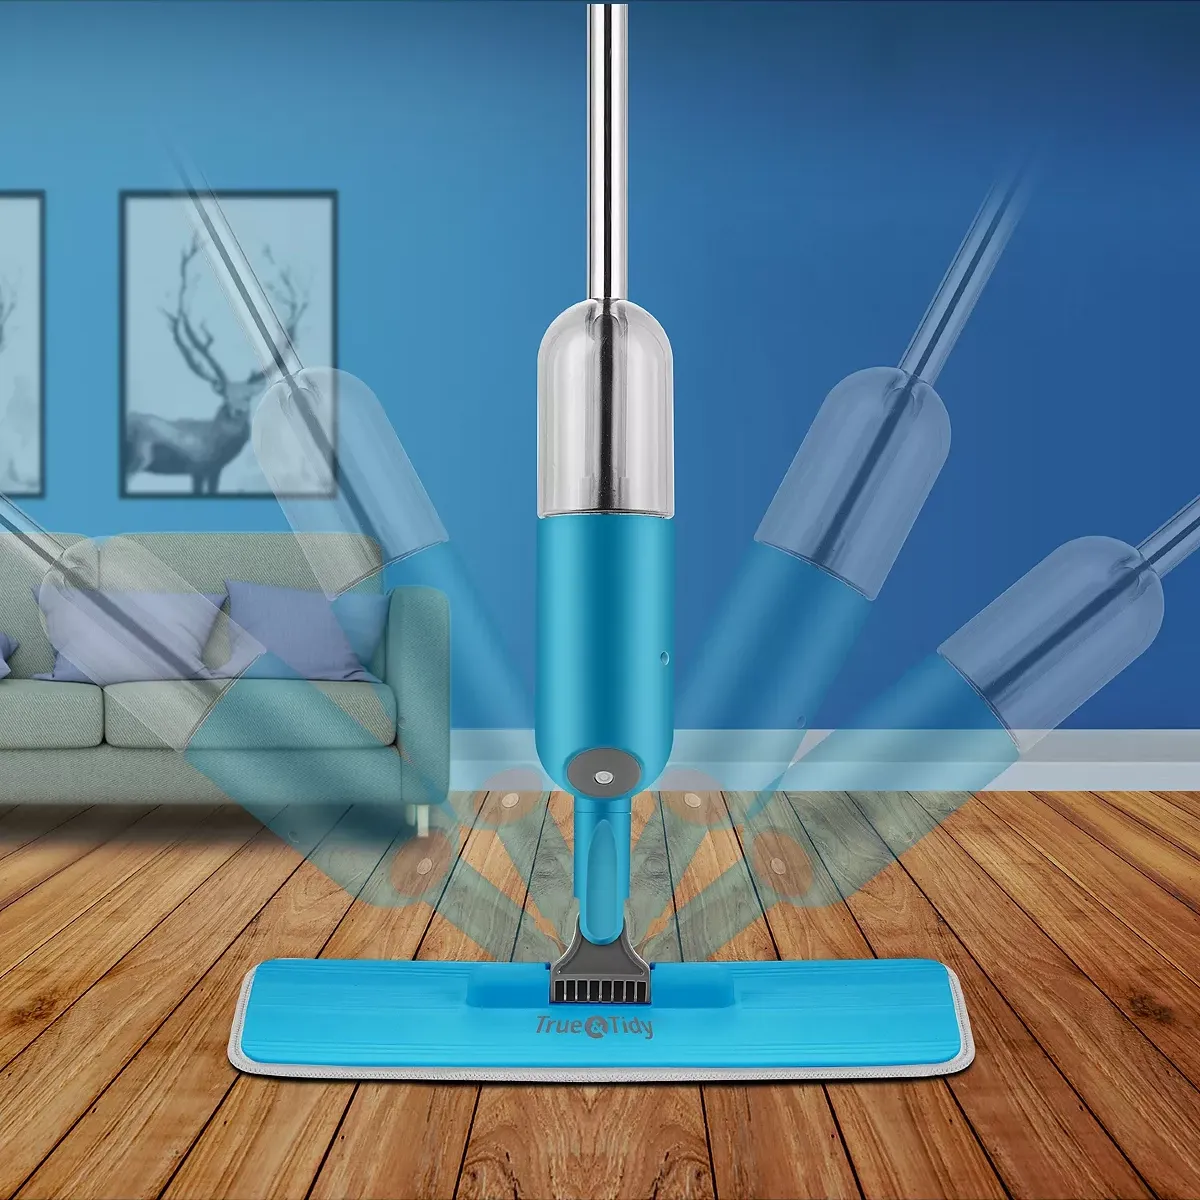 A blue and silver steam mop with a microfiber pad on a wooden floor, portrayed with motion to indicate its use.